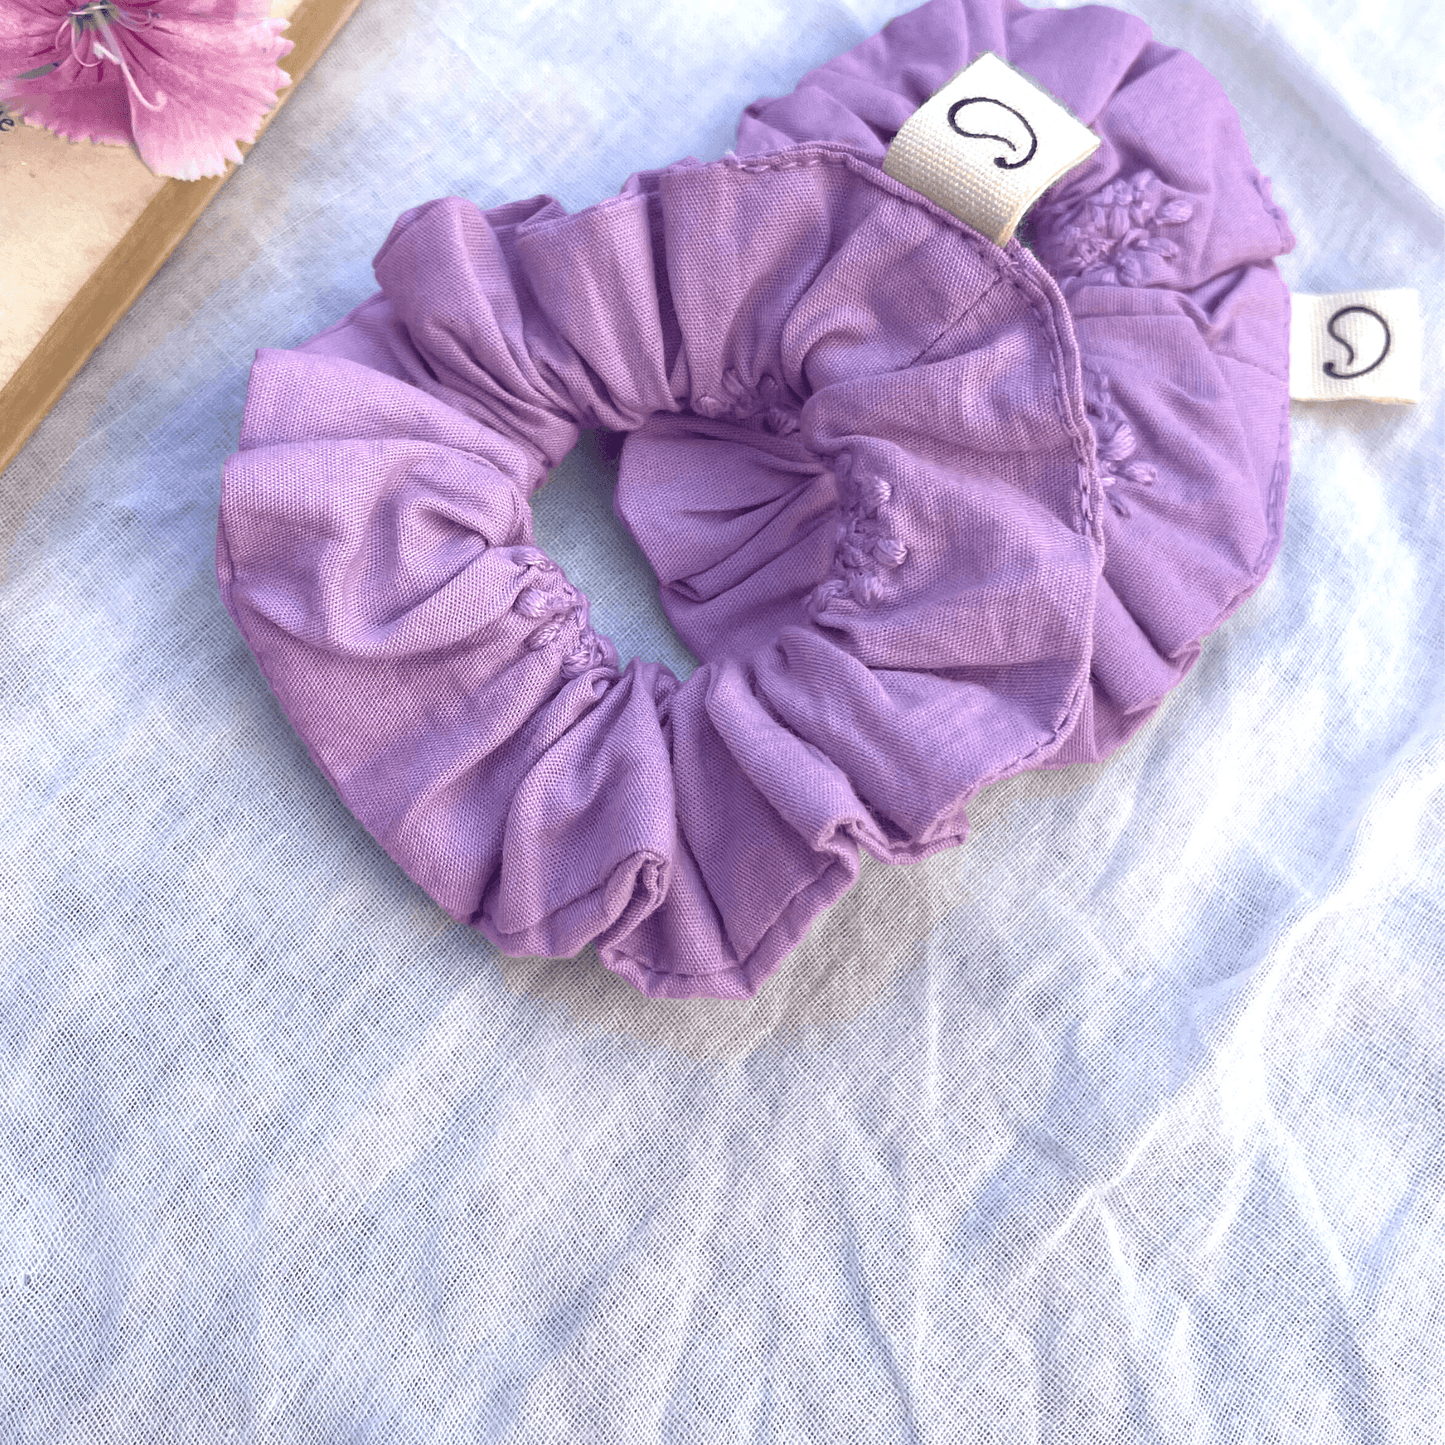 Purple hair scrunchie made with fabric scraps